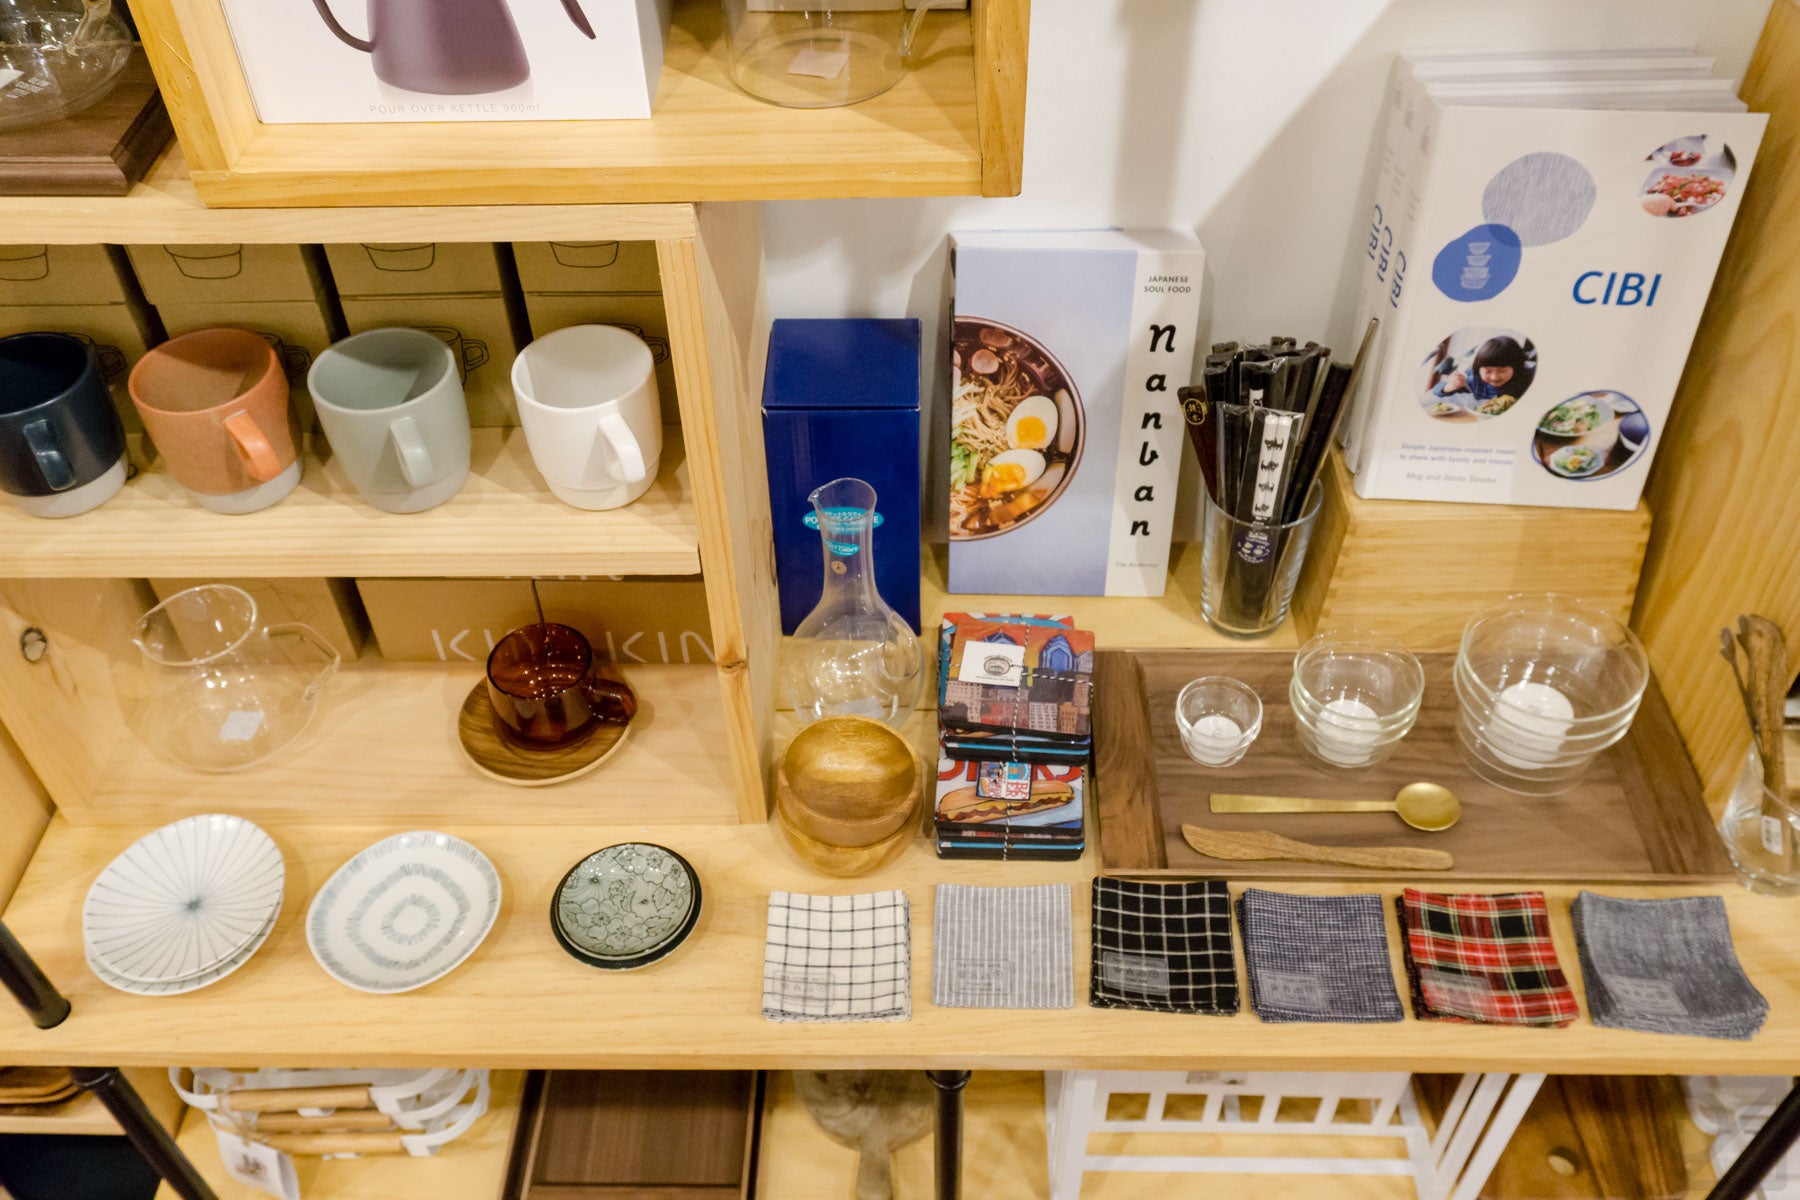 An overhead peek at coffee mugs, coasters, and other table settings for a nice time